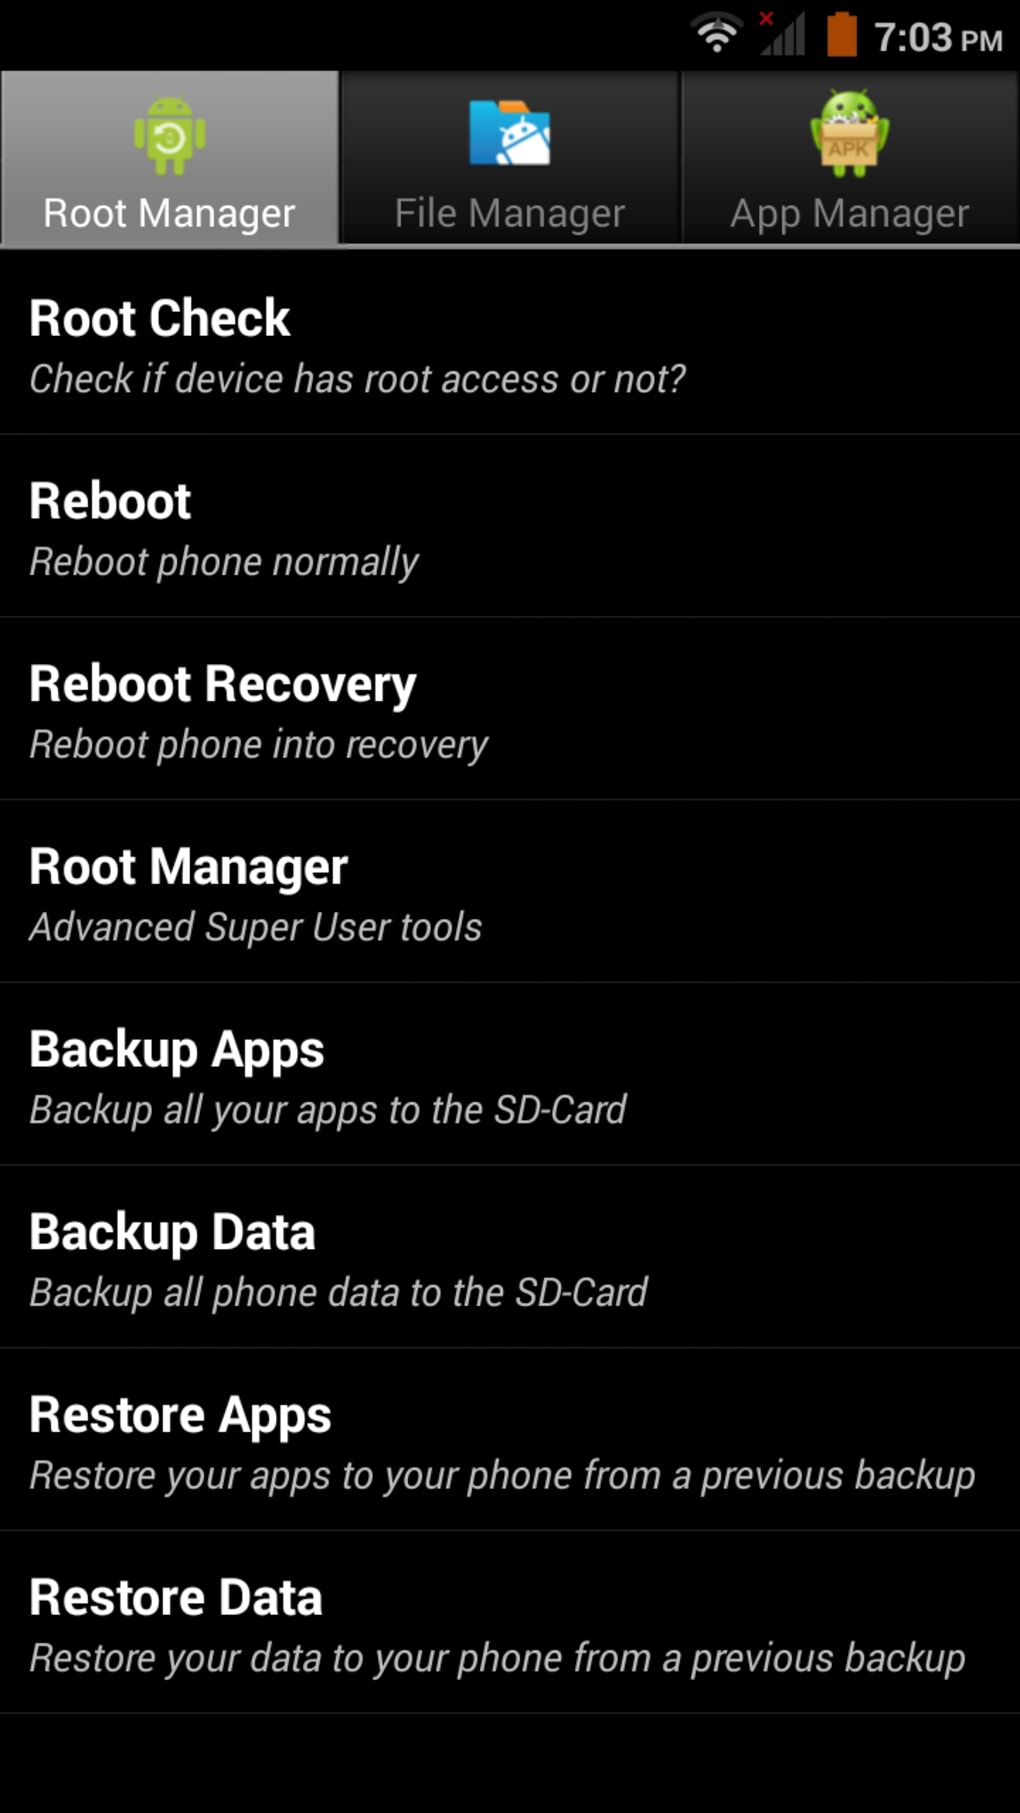 Root tool. Root apps for Android. Root менеджер. Root доступ на андроид. Инструмент roots.